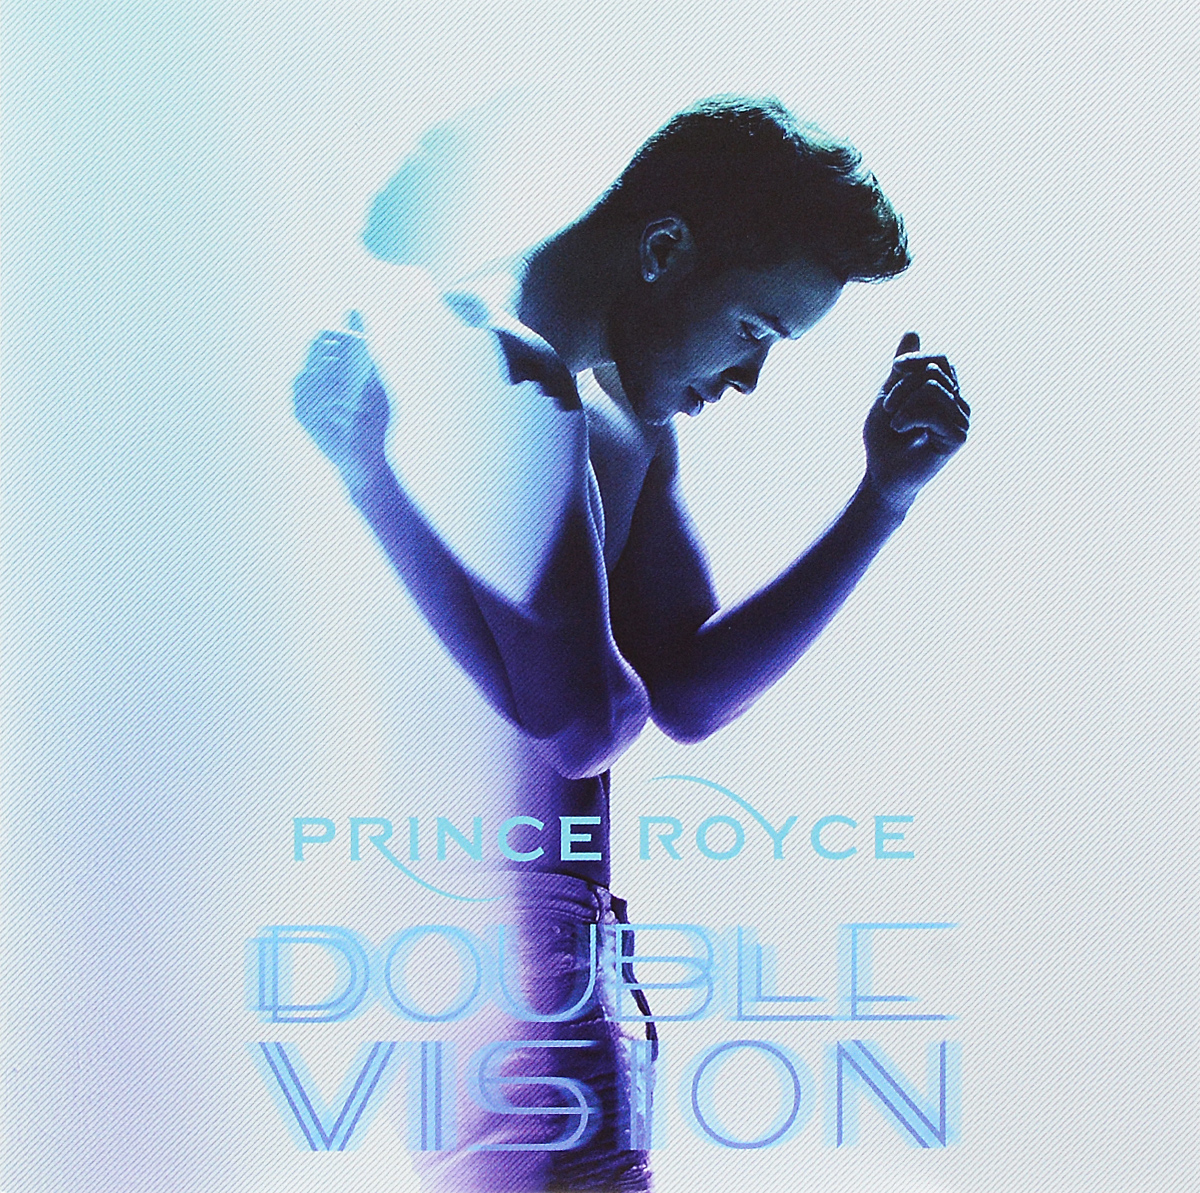 Prince Royce. Double Vision